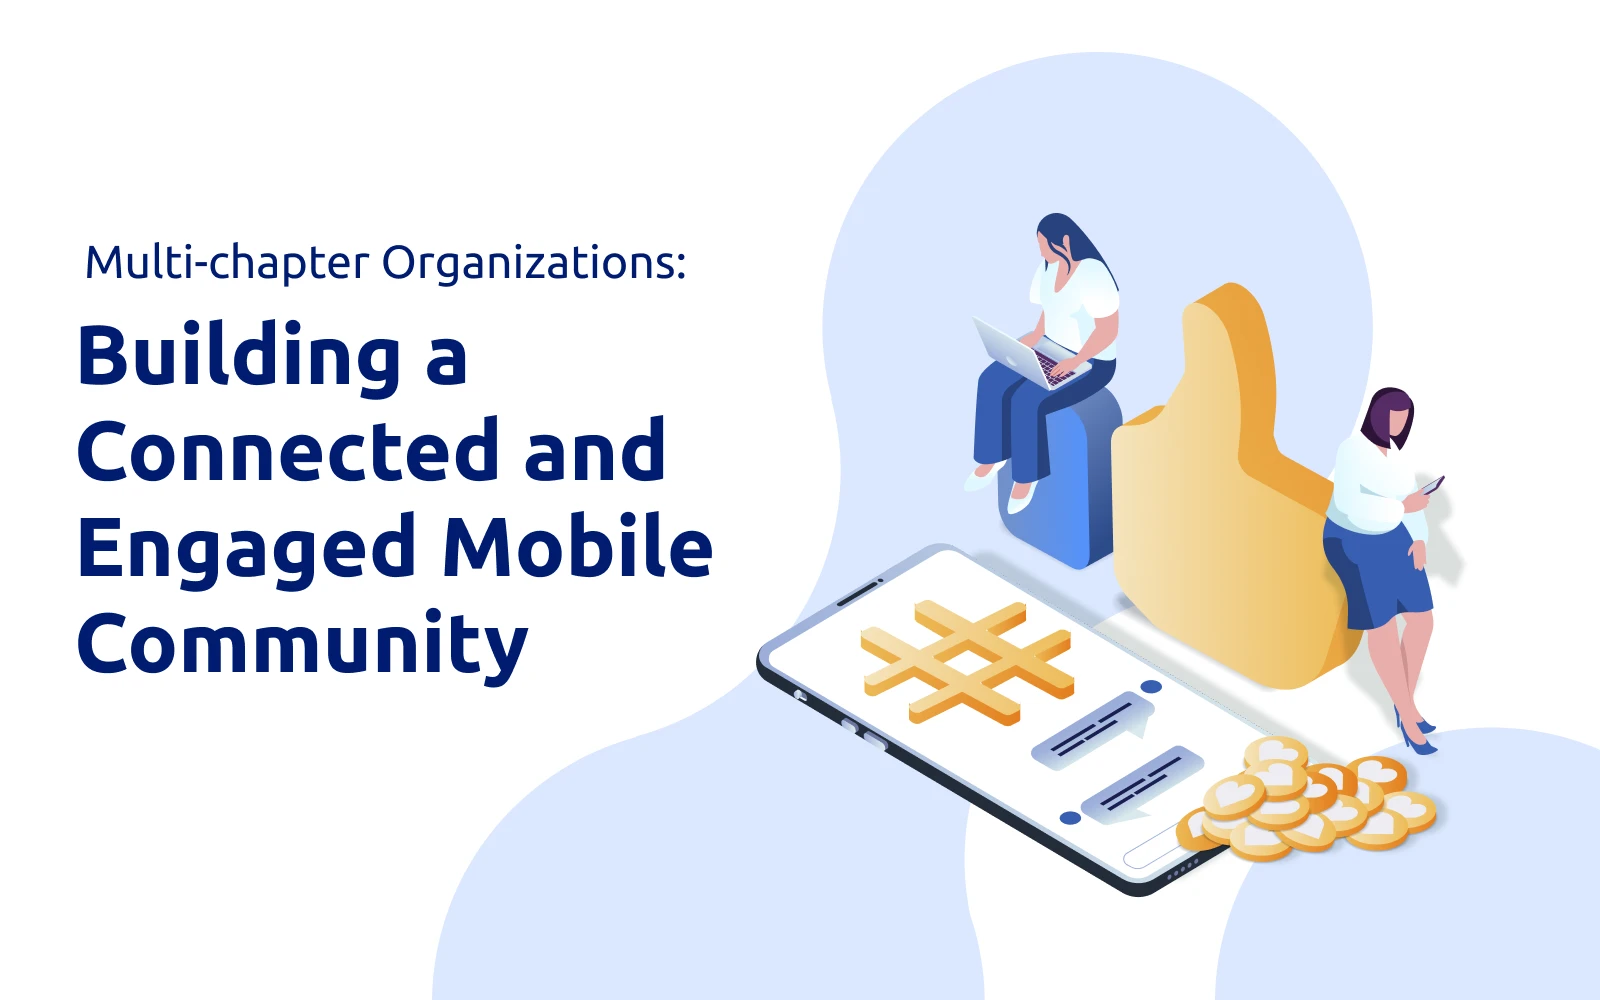 Multi-Chapter Organizations: Building a Connected and Engaged Mobile Community